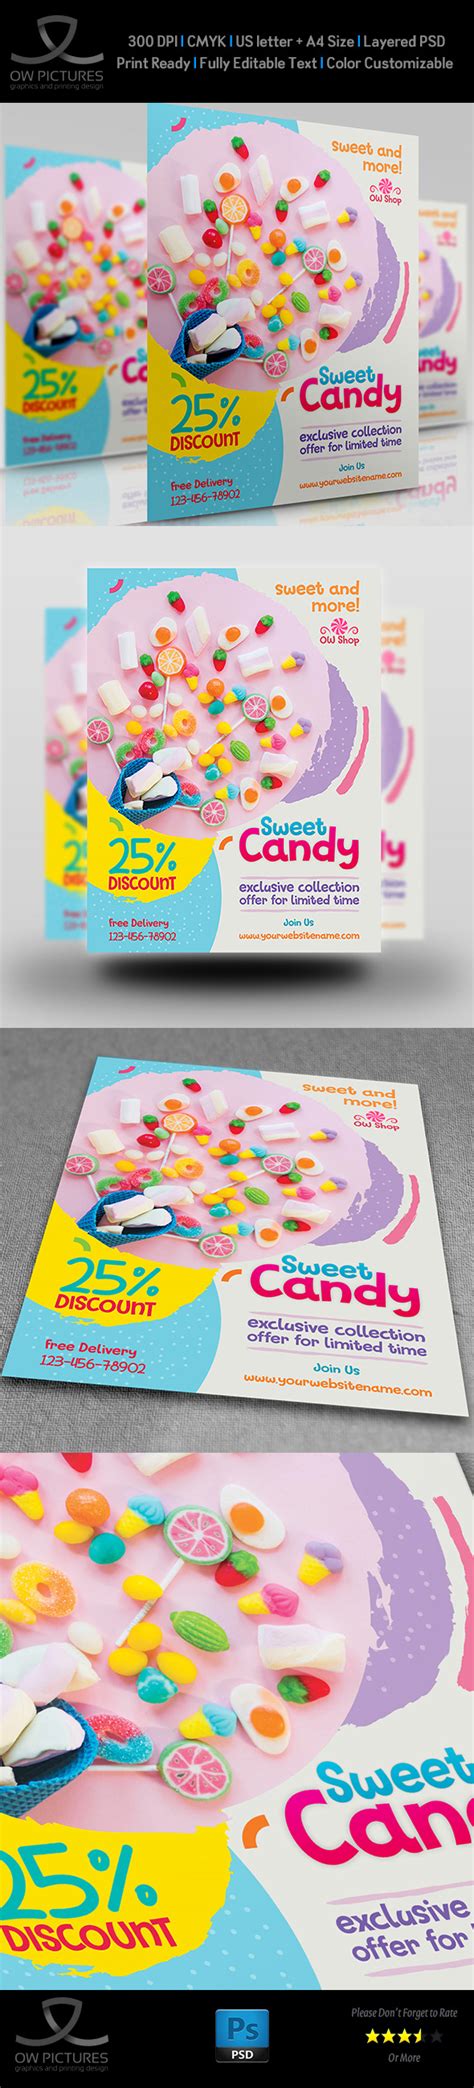 Candy Shop Cake Sweet Ice Cream Flyer Template On Behance